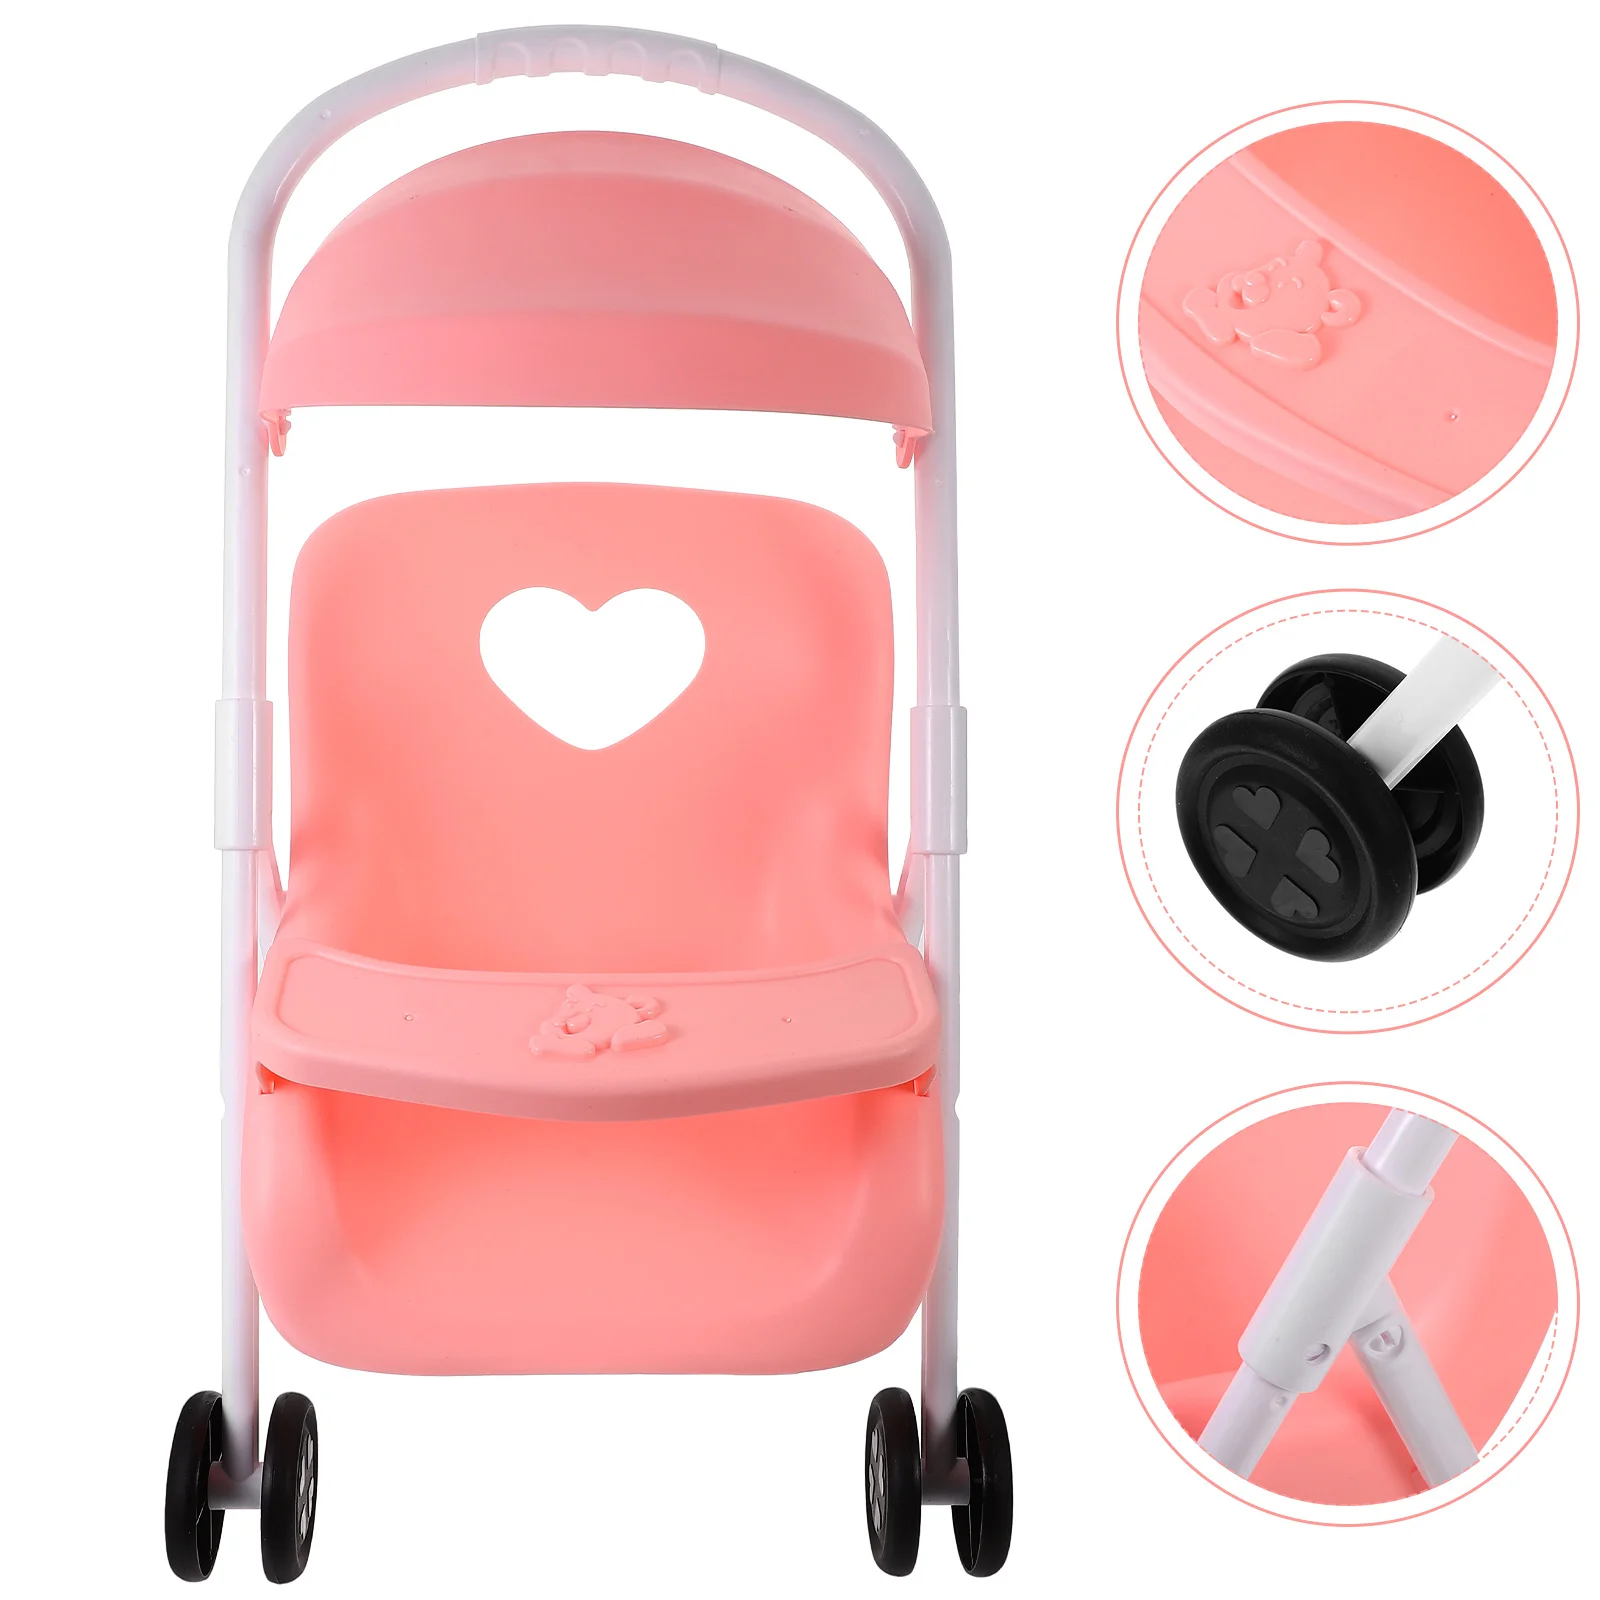 Doll Stroller Play Game Doll Stroller Simulated Play Game Stroller Furniture Adornment Children Role Playing Game for Dollhouse baby stroller umbrella baby car umbrellas hand open 8mm steel shaft and fiberglass ribs children kid outdoor clamp parasol clip